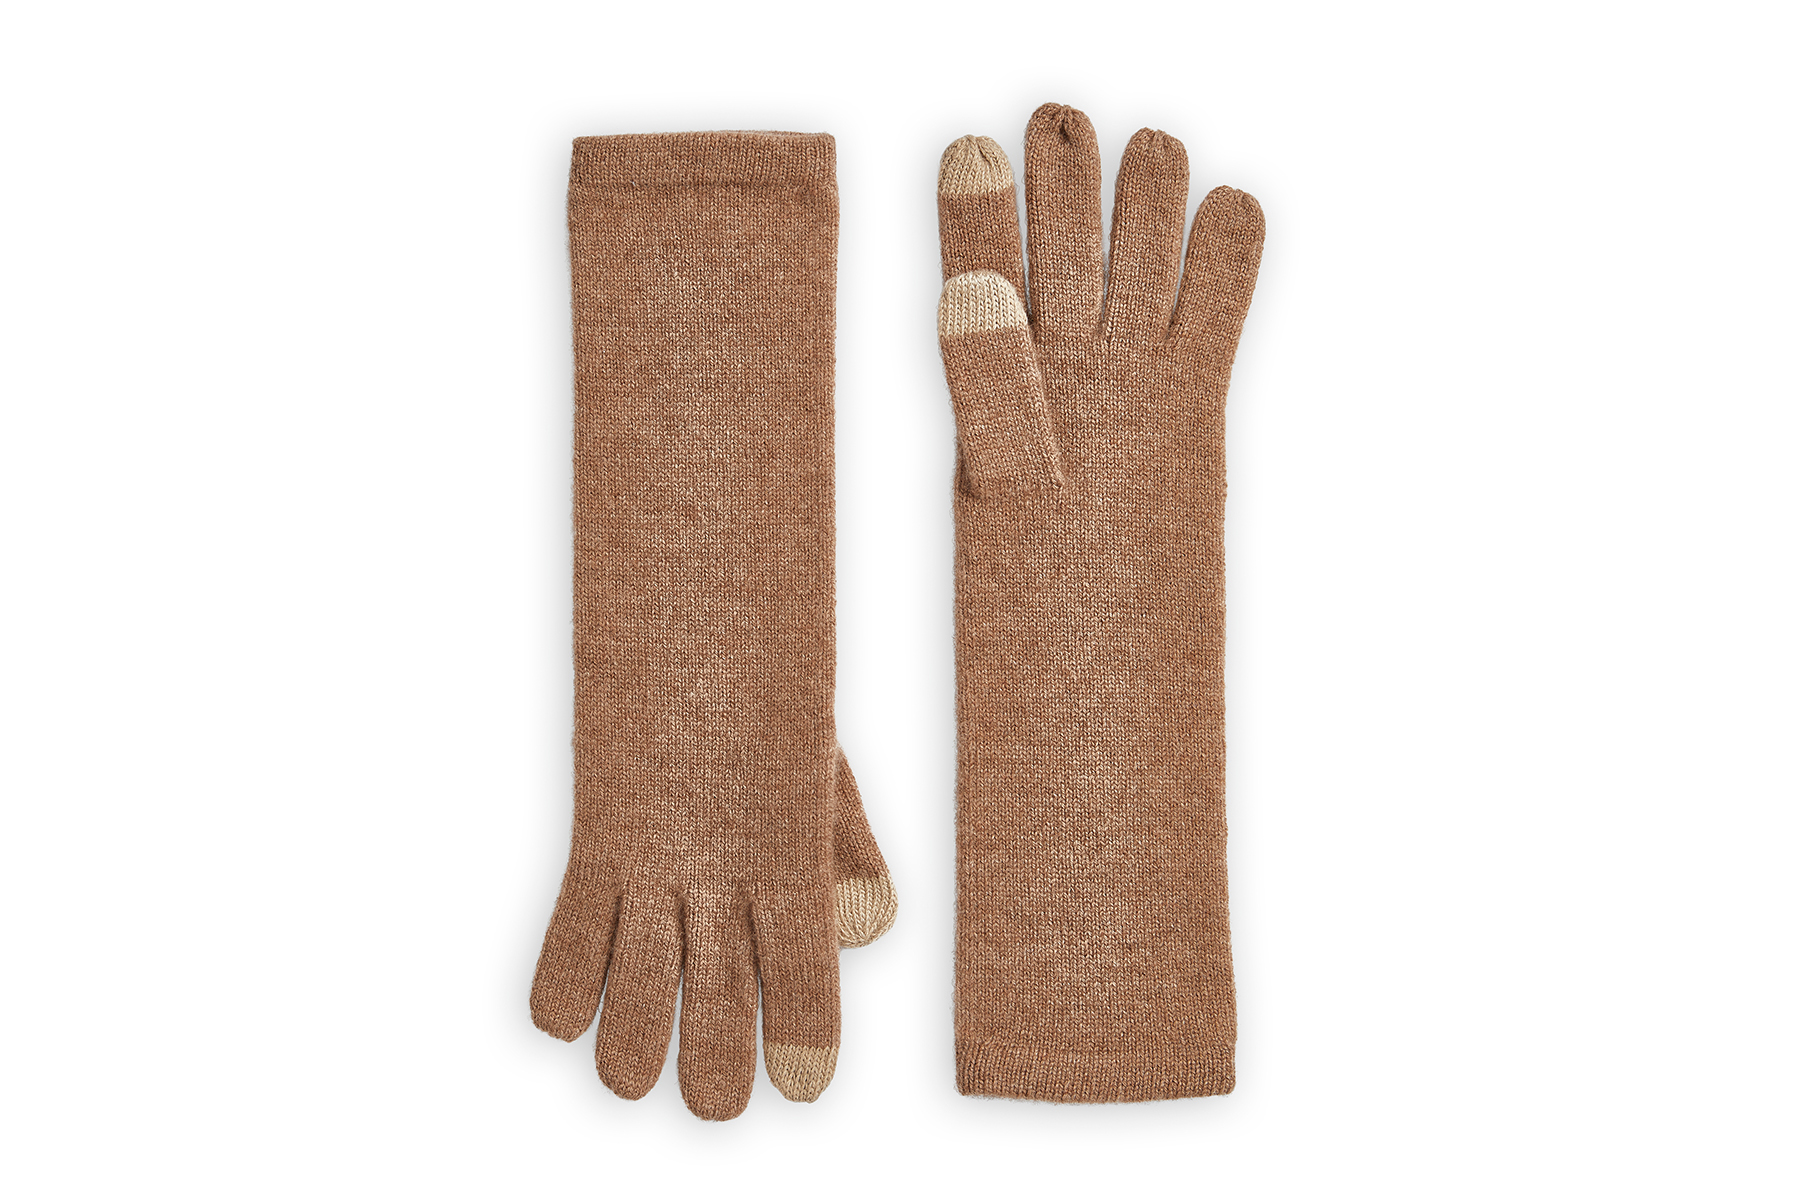 Tech Touch Long Cashmere Gloves from Misook